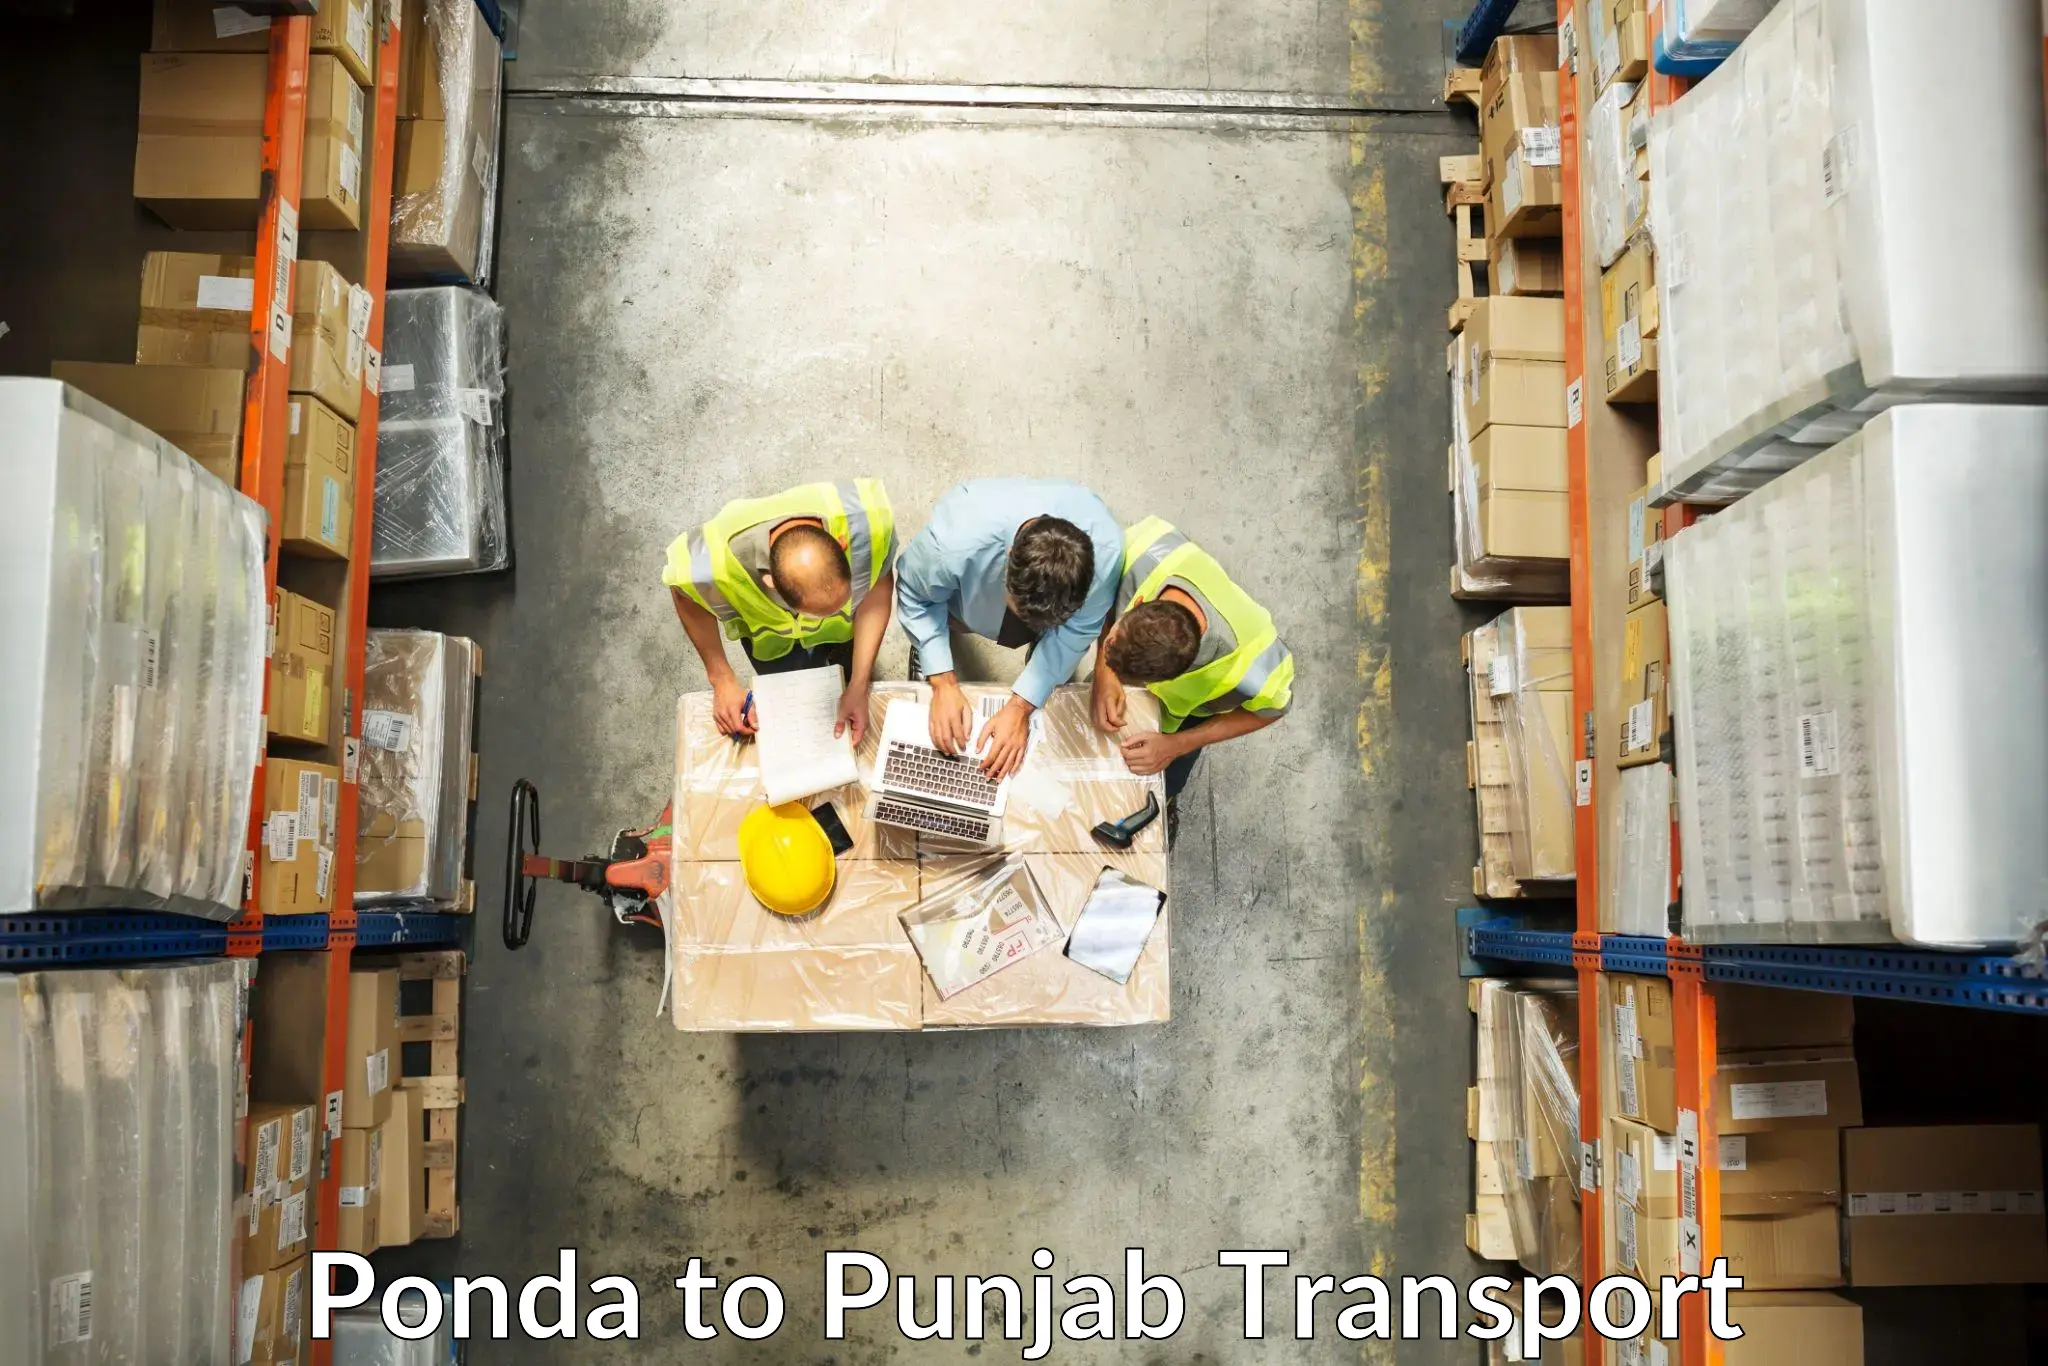 Part load transport service in India Ponda to Mohali